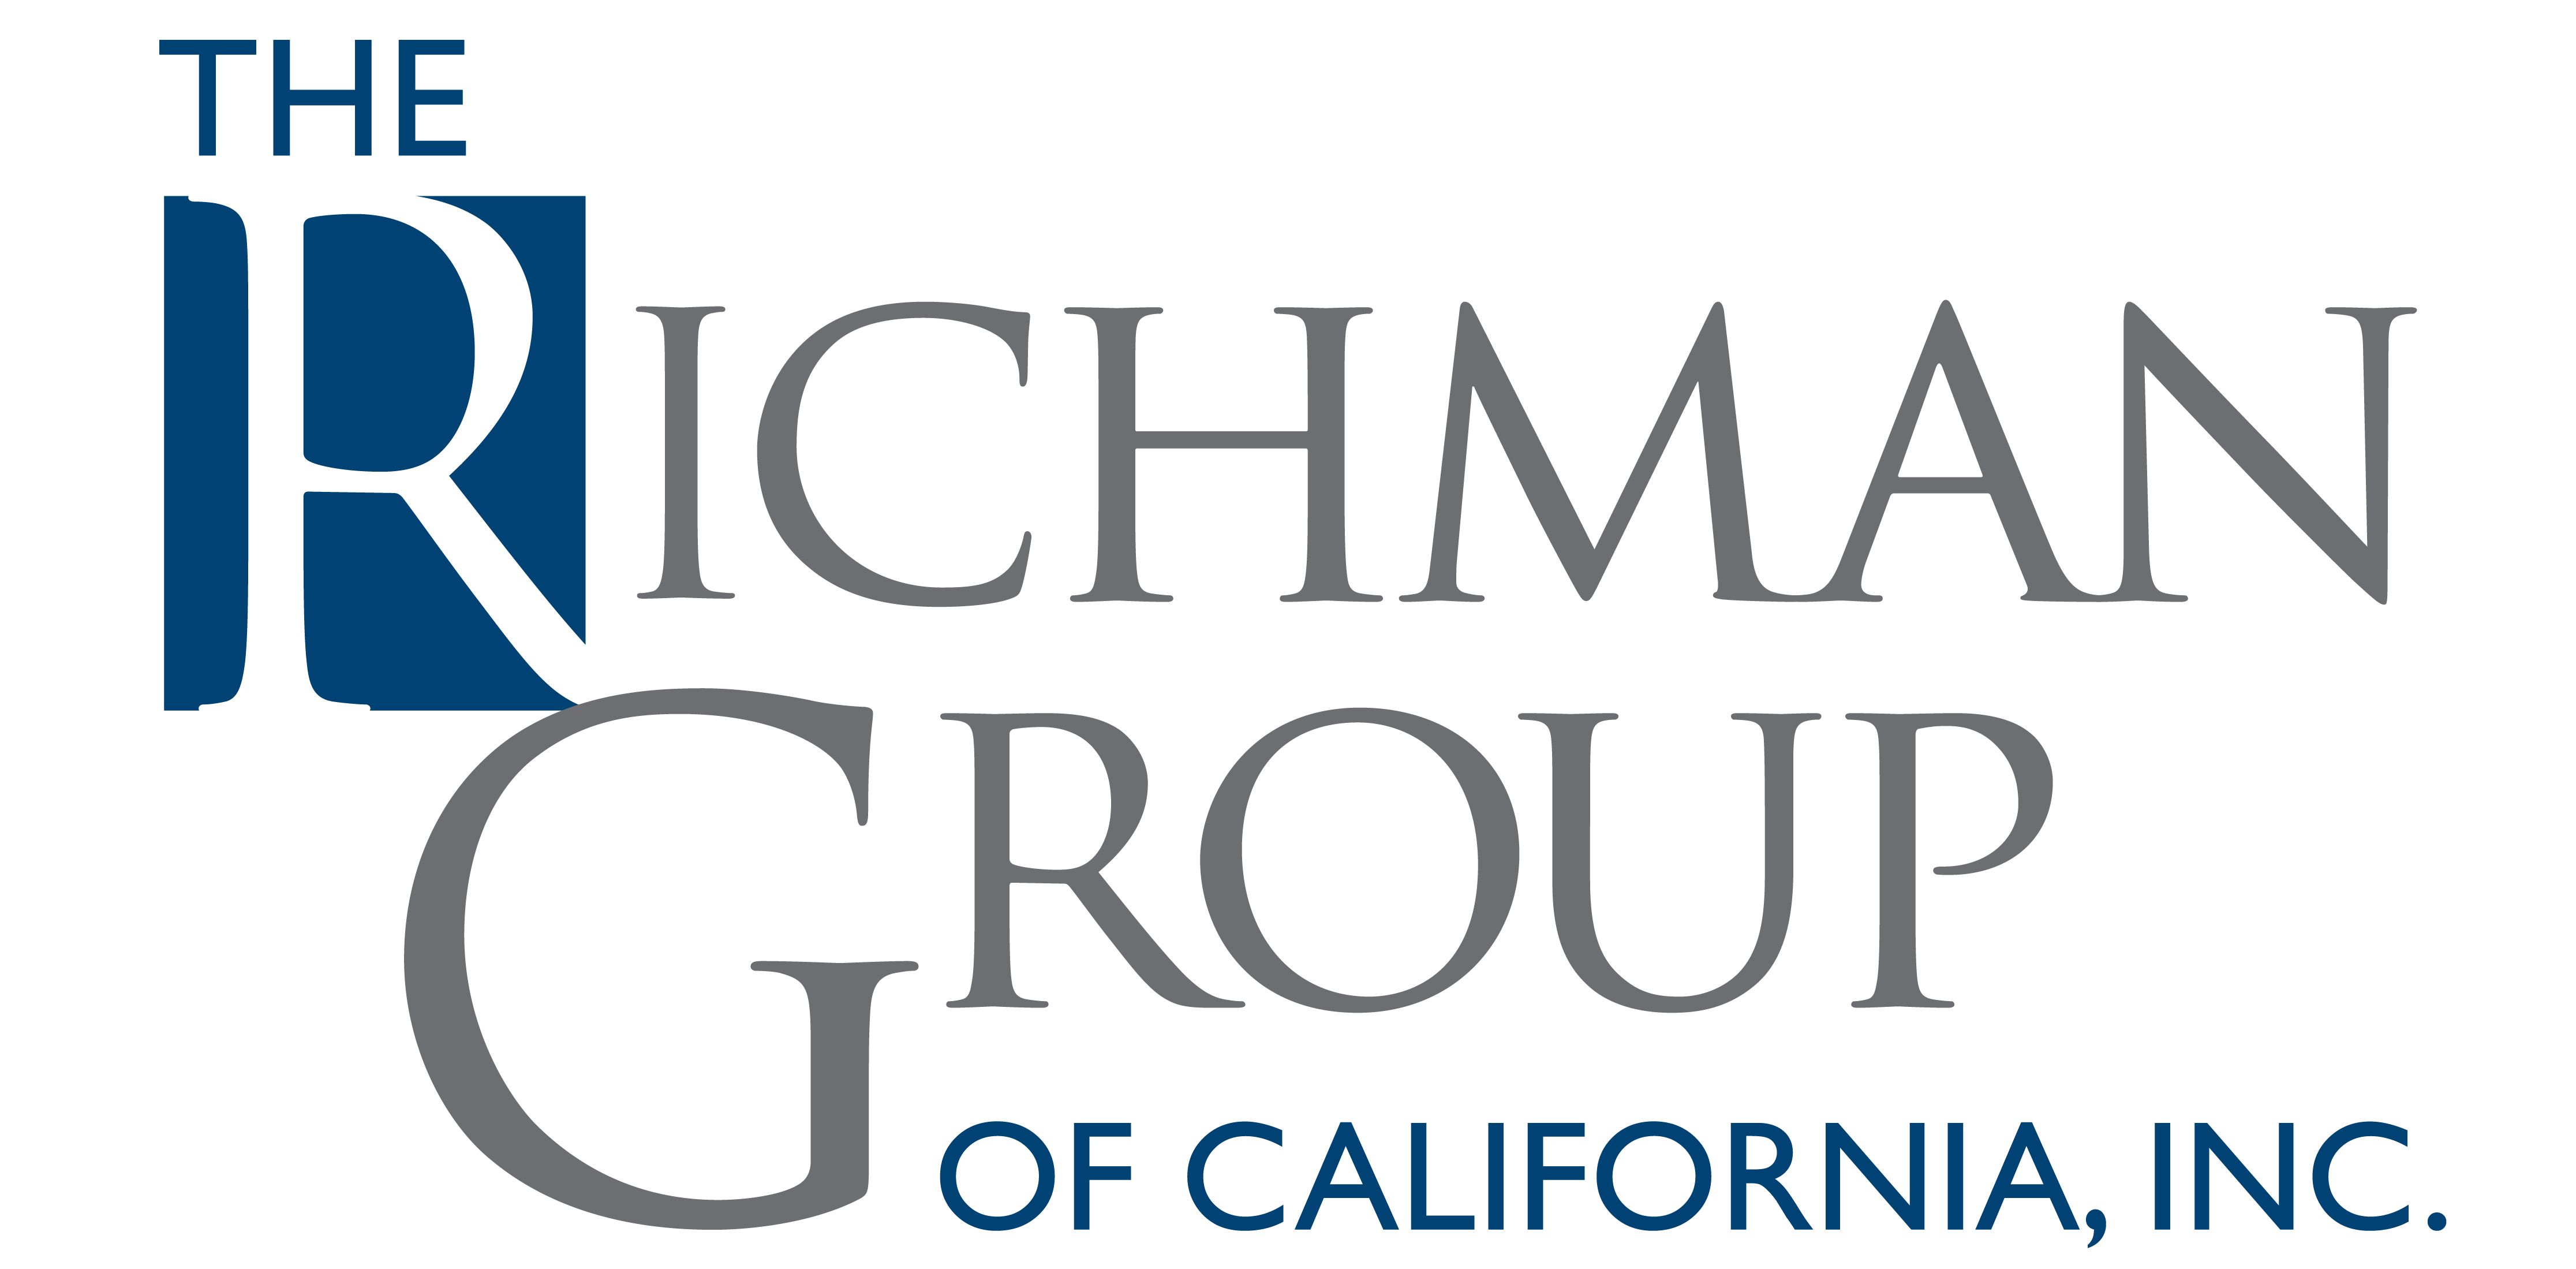 The Richman Group